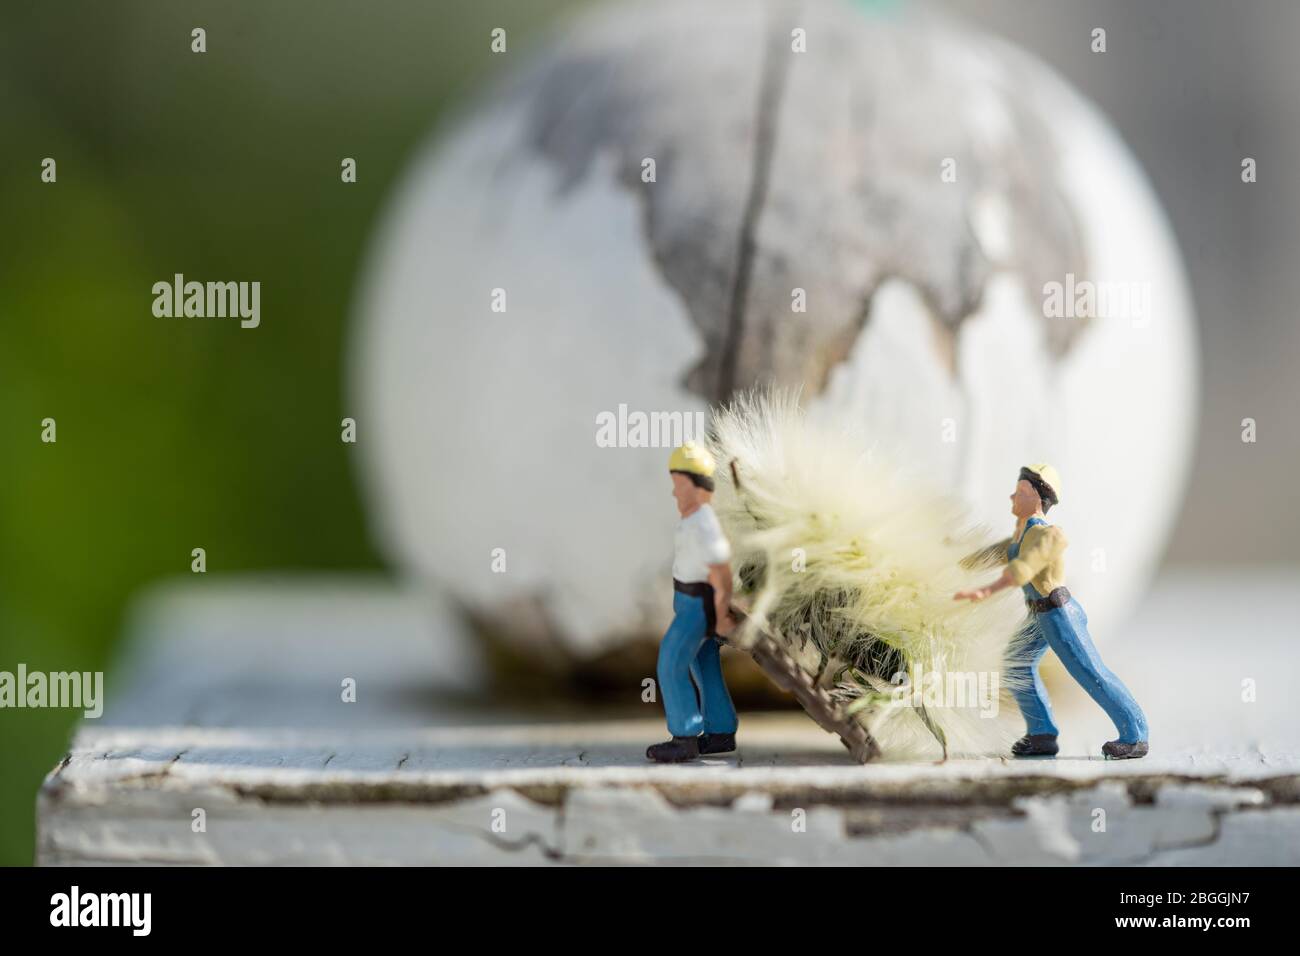 Little people carry off a dandelion flower on the roof of a vintage birdfeeder Stock Photo